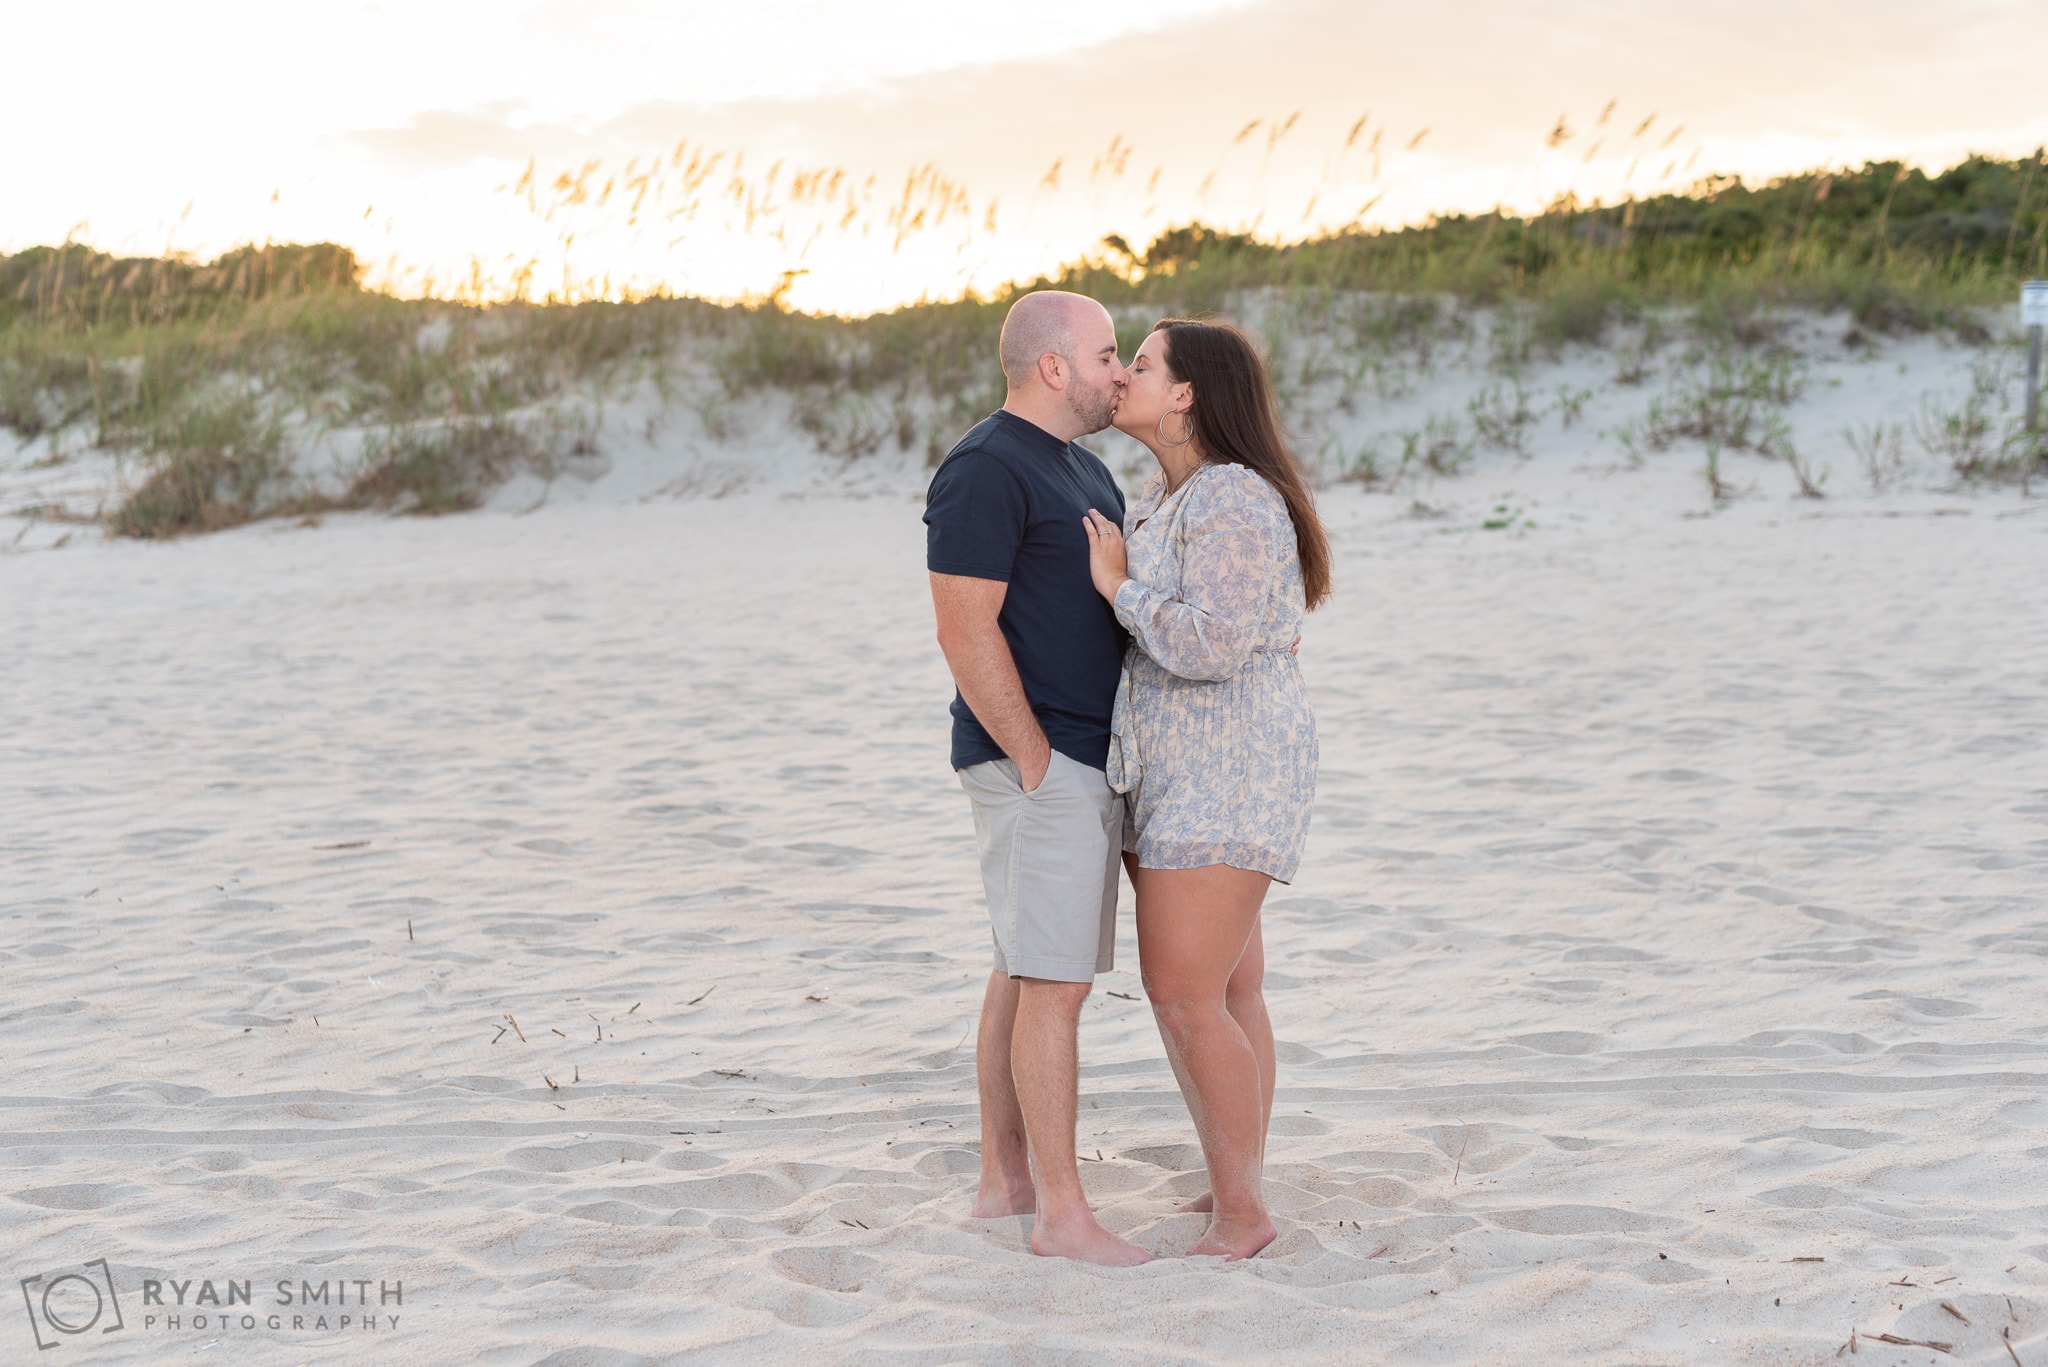 Kiss in the sunset - Huntington Beach State Park